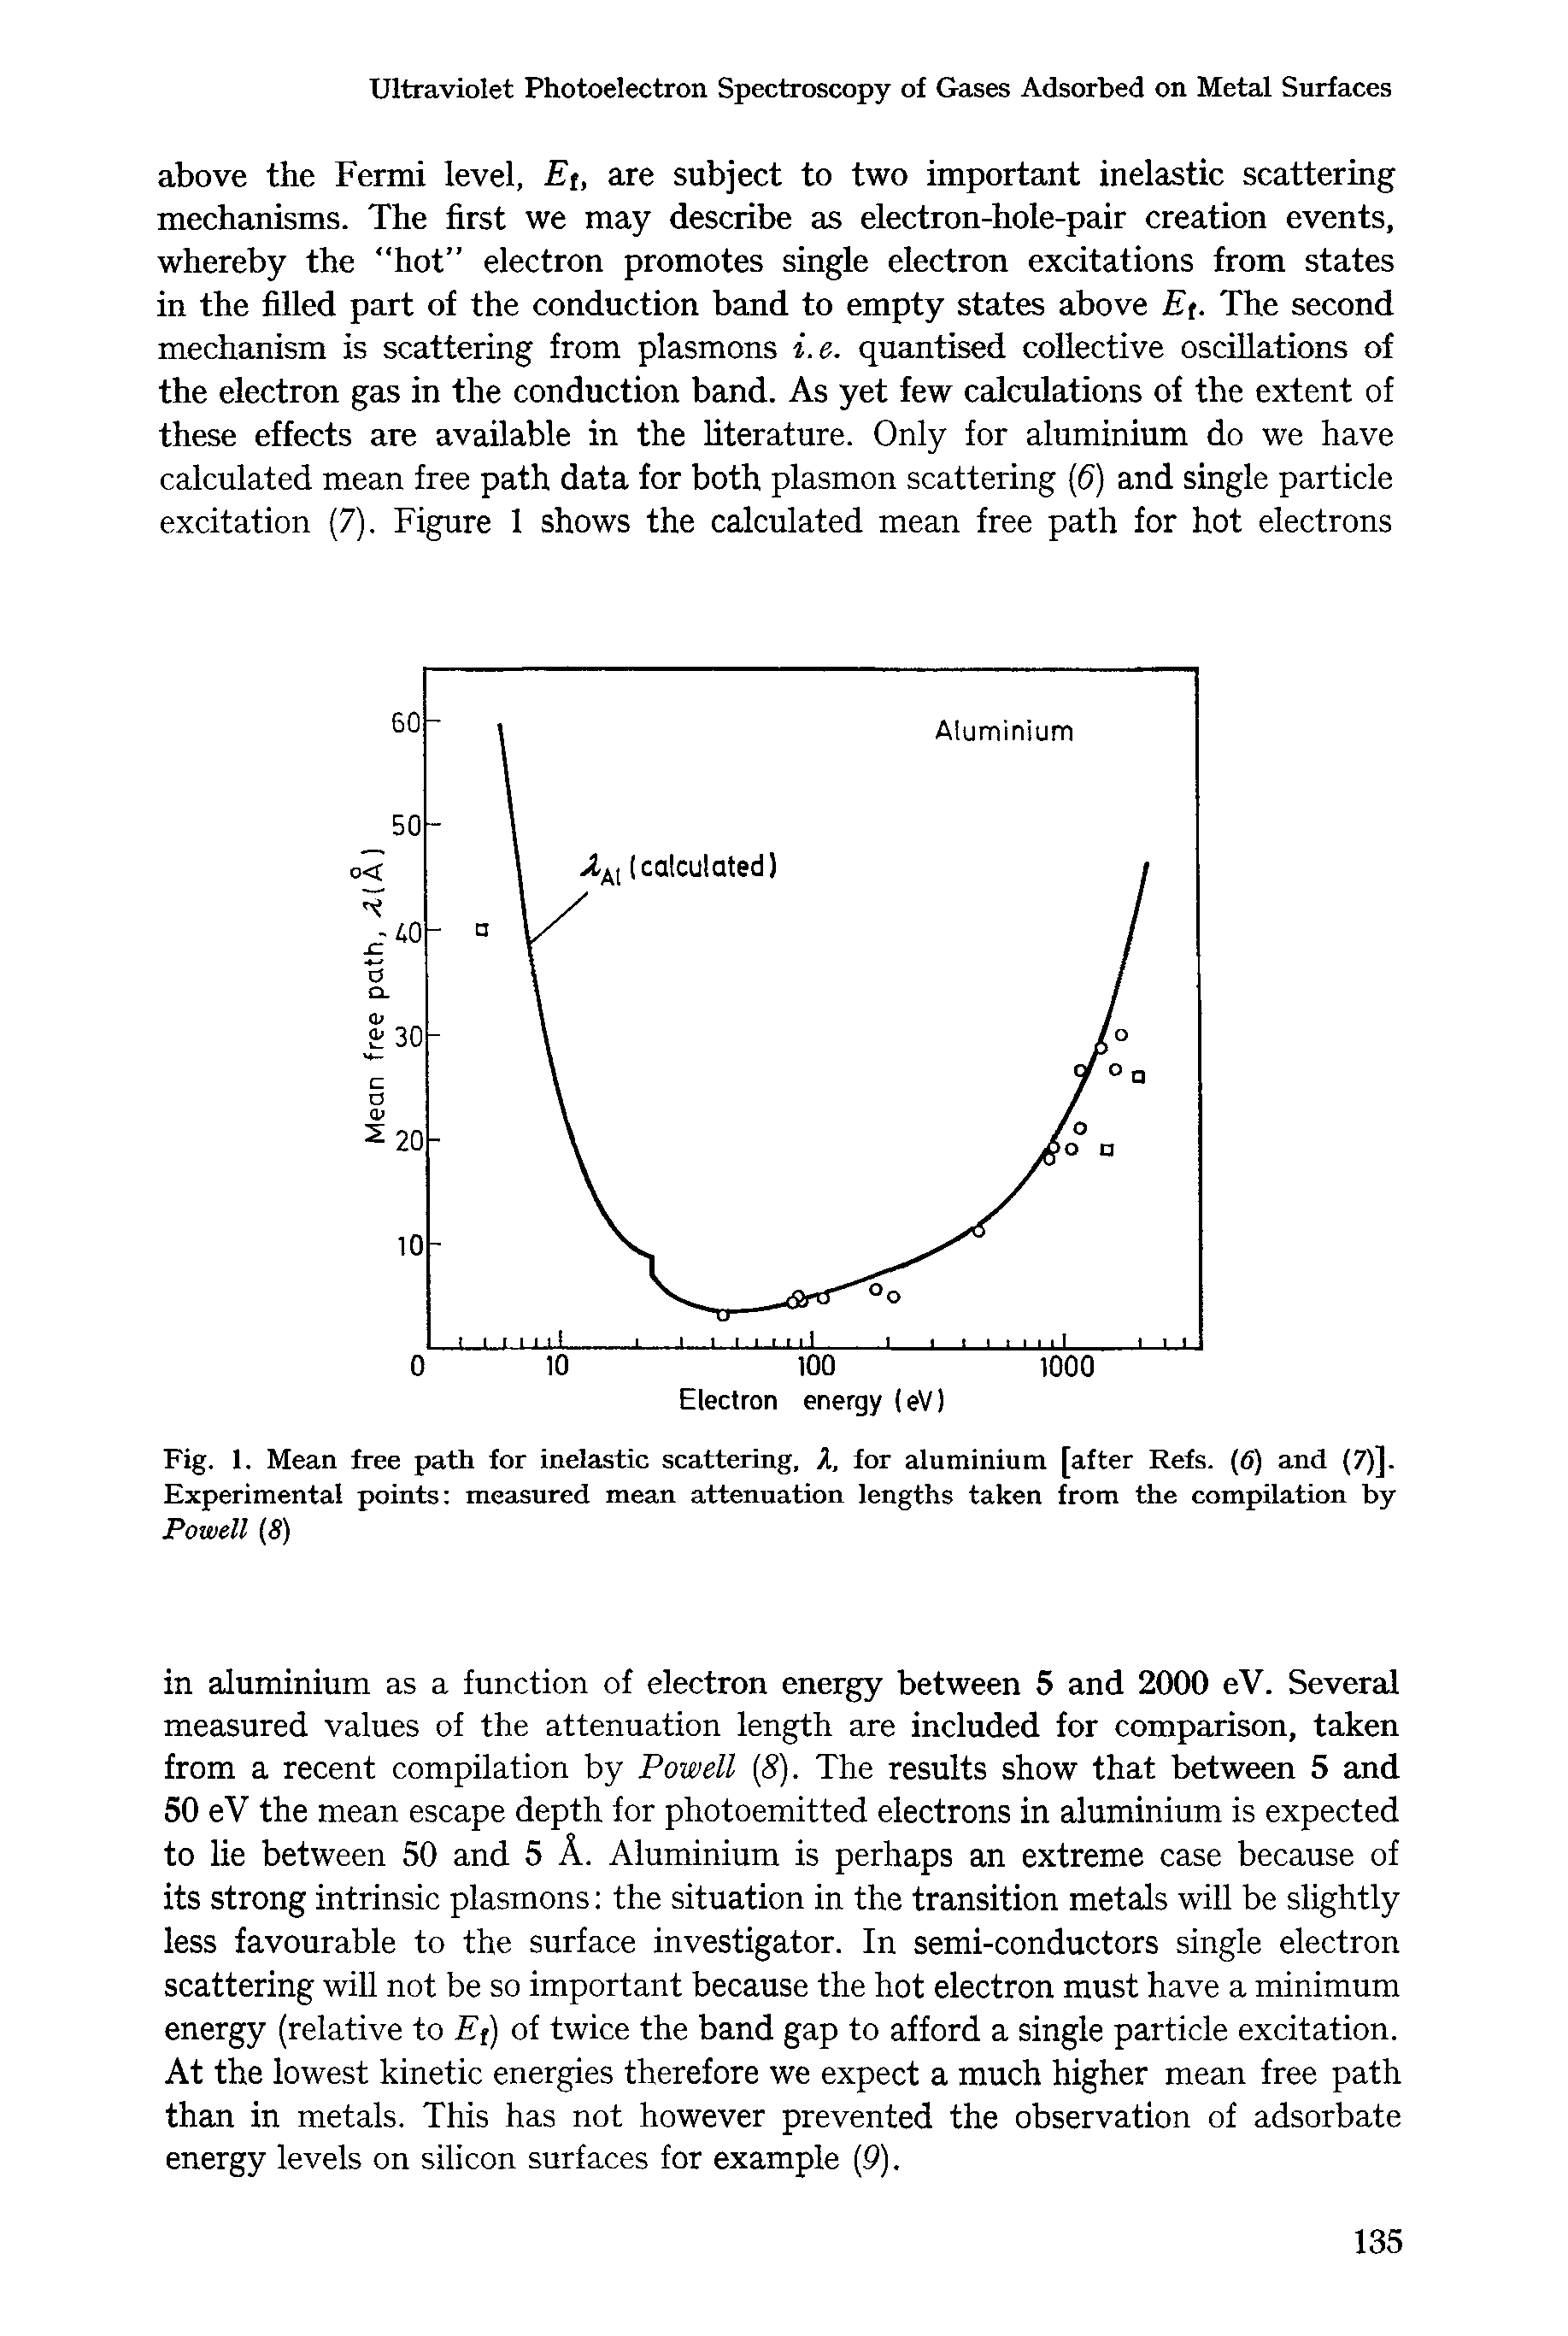 Fig. 1. Mean free path for inelastic scattering, A, for aluminium [after Refs. (6) and (7)]. Experimental points measured mean attenuation lengths taken from the compilation by Powell (5)...